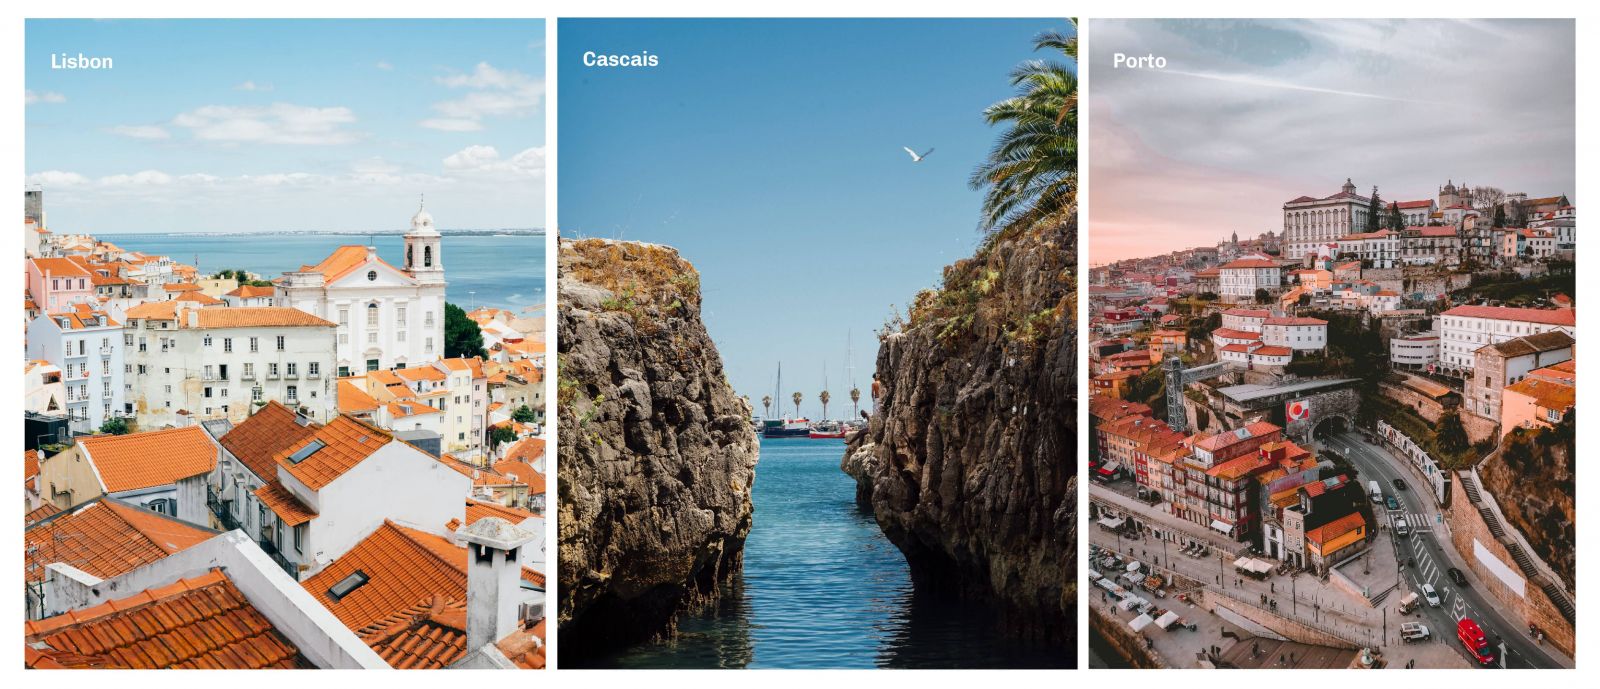 Portugal Homes invites you to look into relocating to Portugal, popular locations such as Lisbon, Cascais, and Porto.